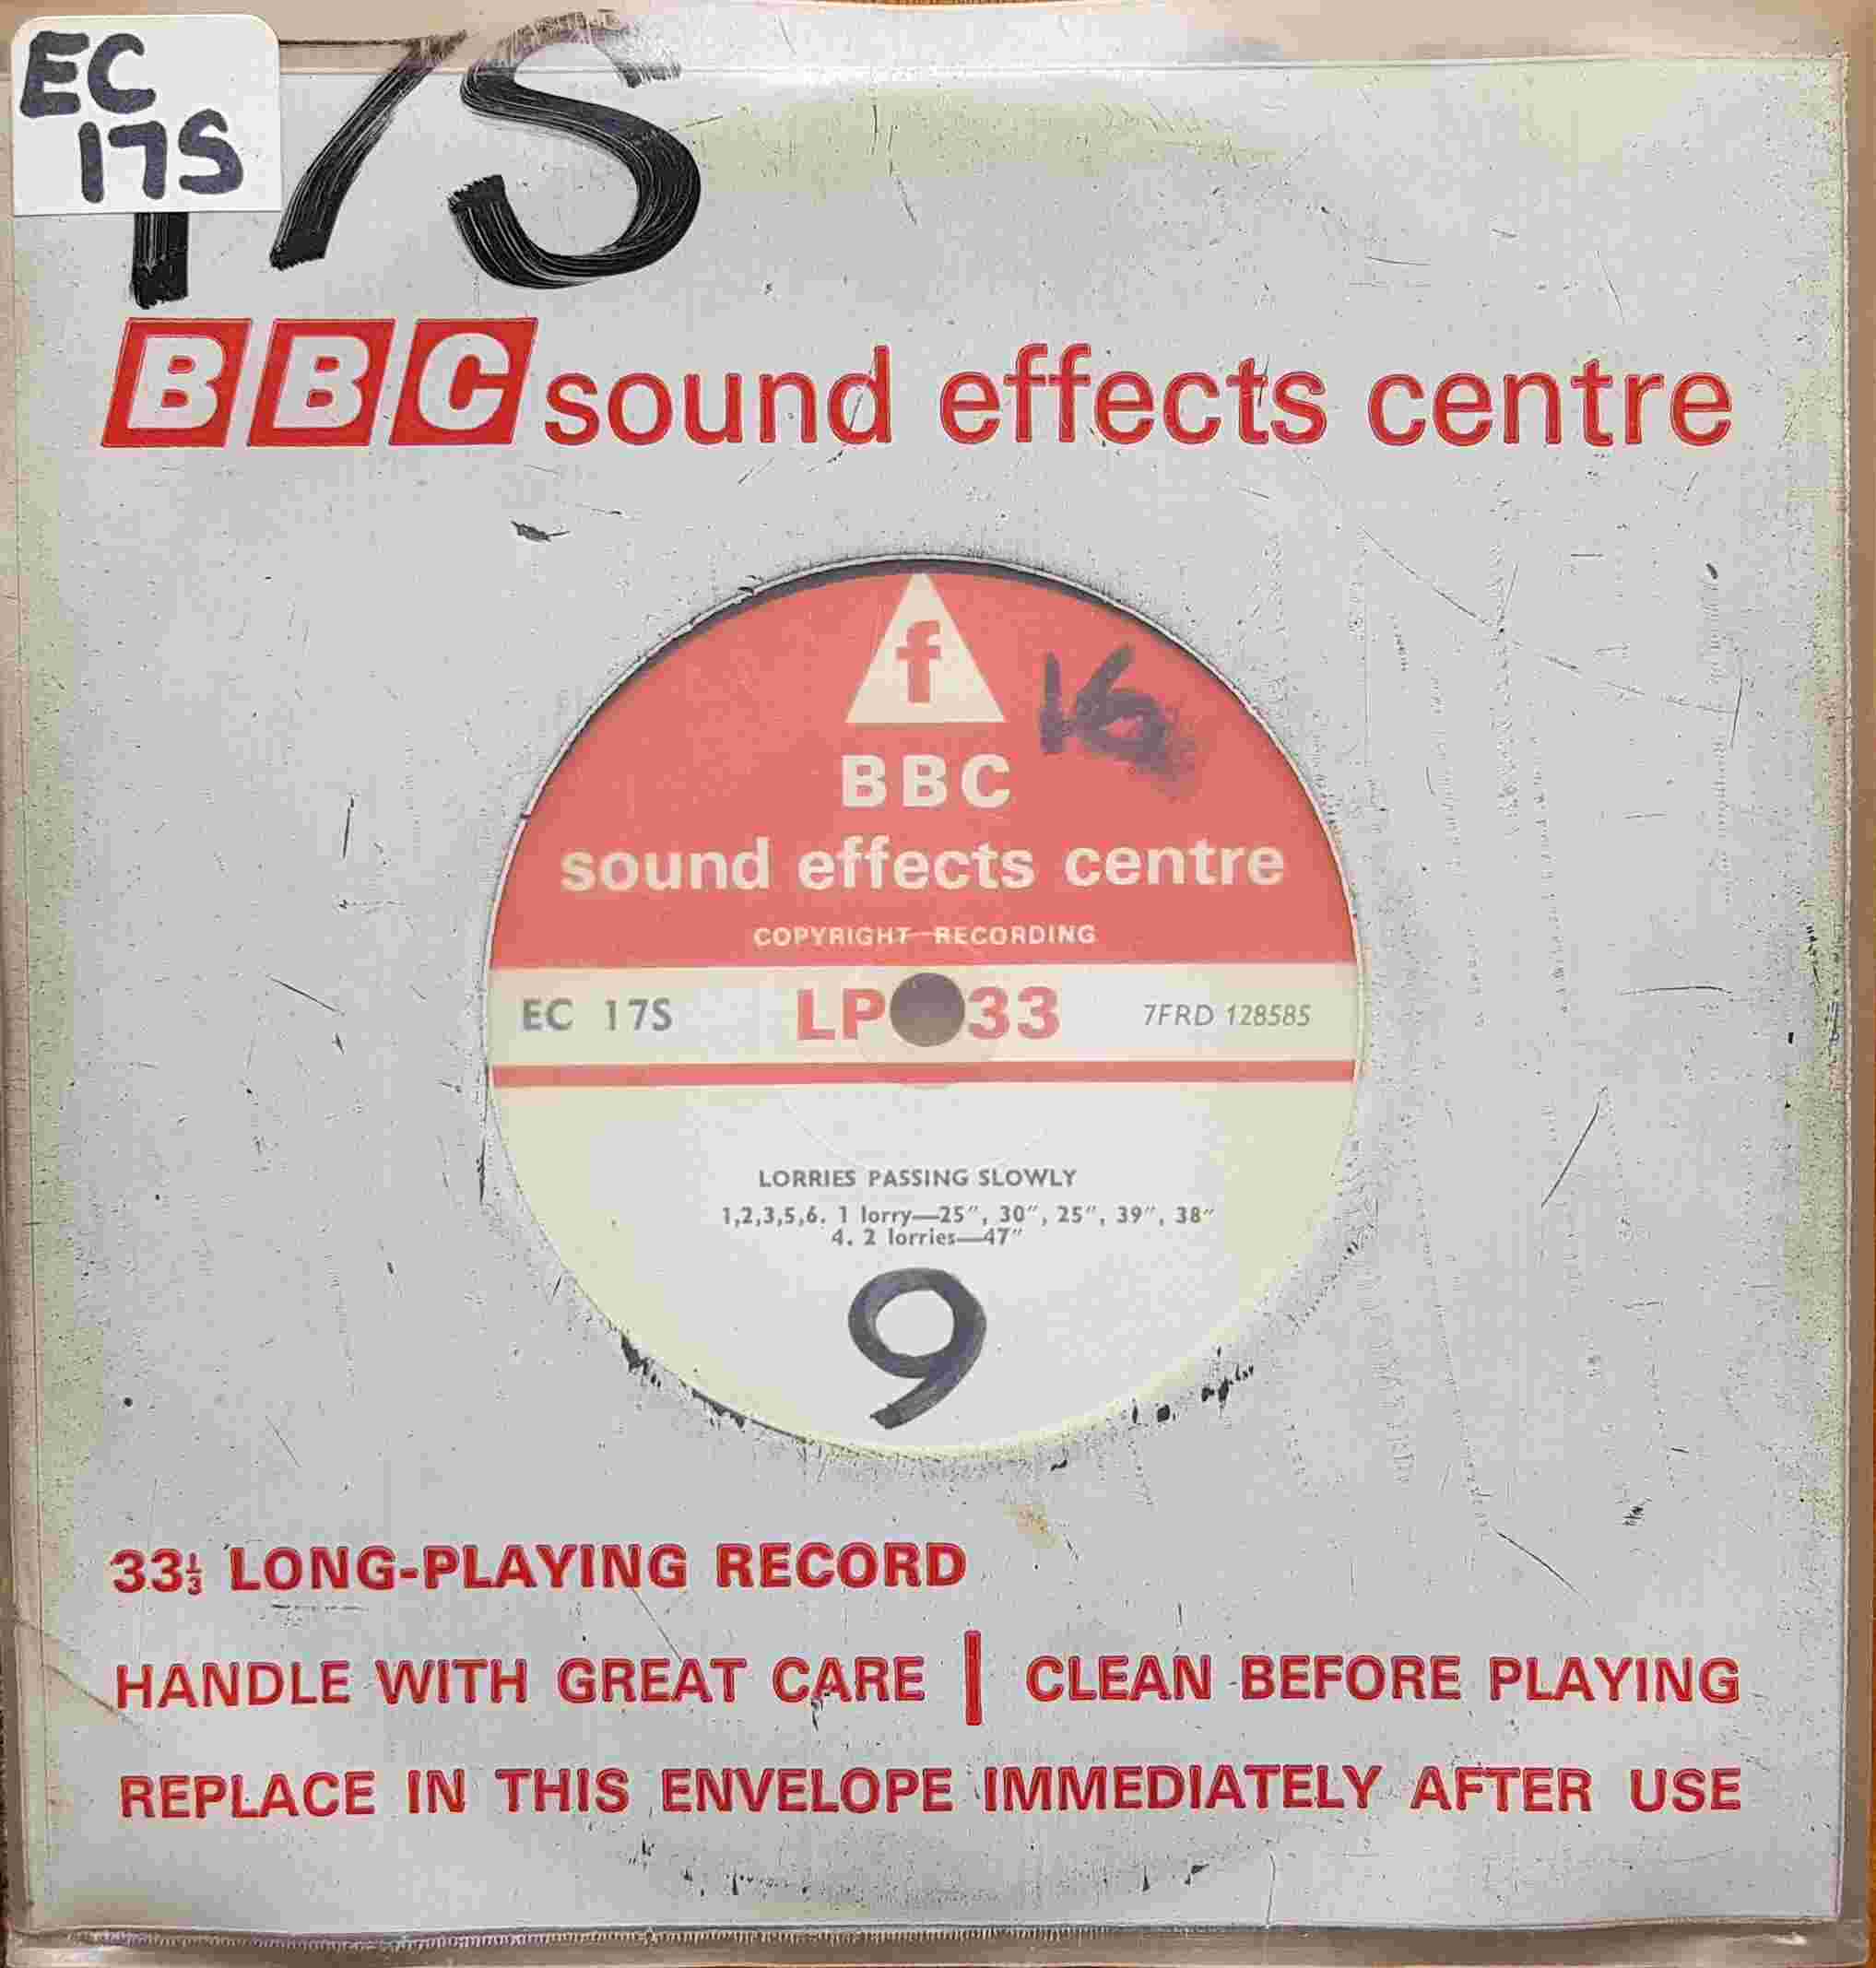 Picture of EC 17S Lorries passing slowly / Tractors & lorries passing slowly by artist Not registered from the BBC singles - Records and Tapes library